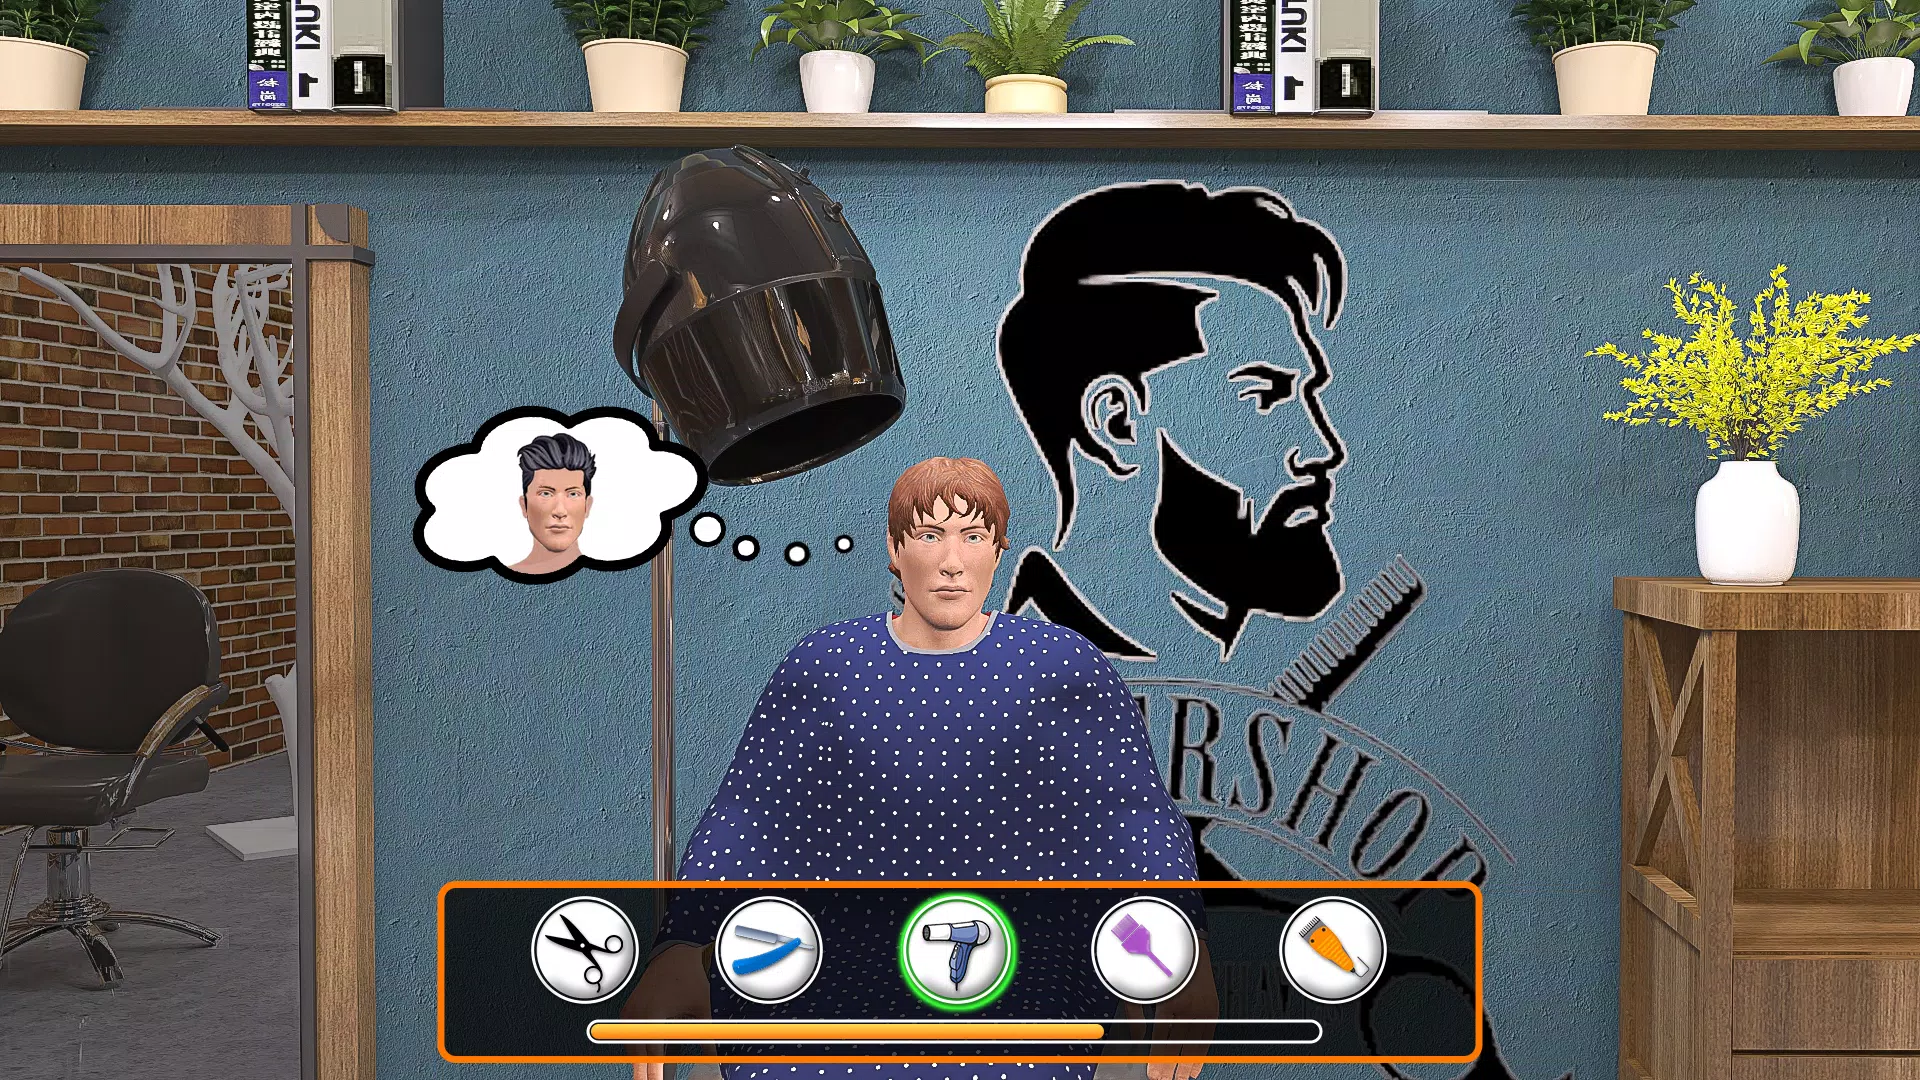 Download Virtual Barber Shop Simulator: Hair Cut Game 2020 android on PC